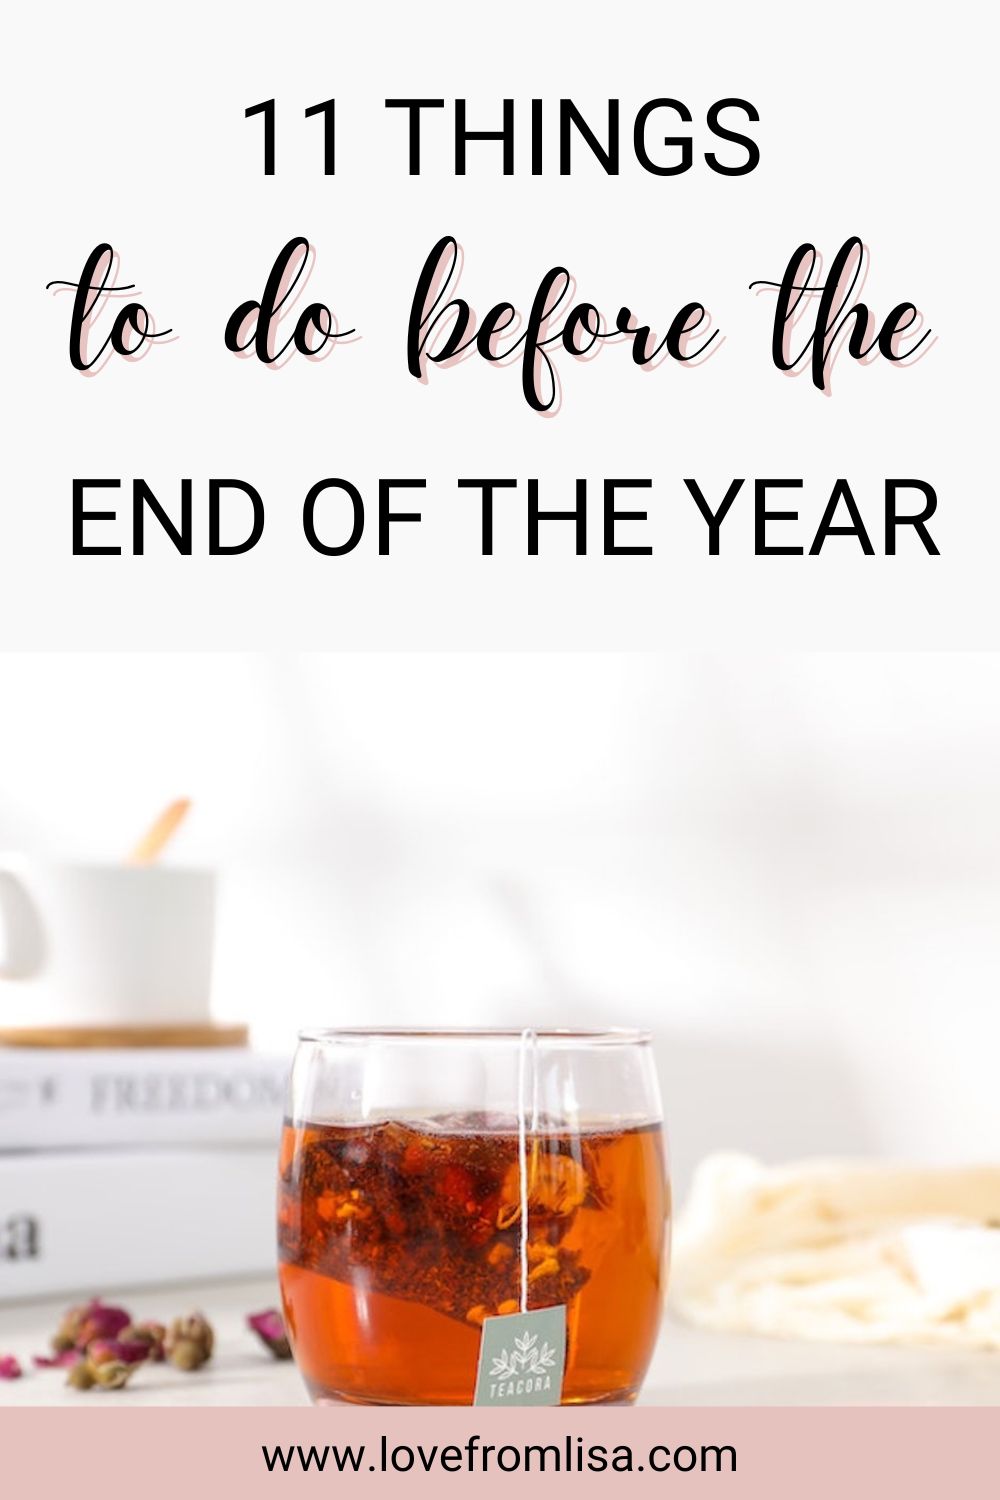 11 things to do before the end of the year writing a gratitude list Pinterest graphic